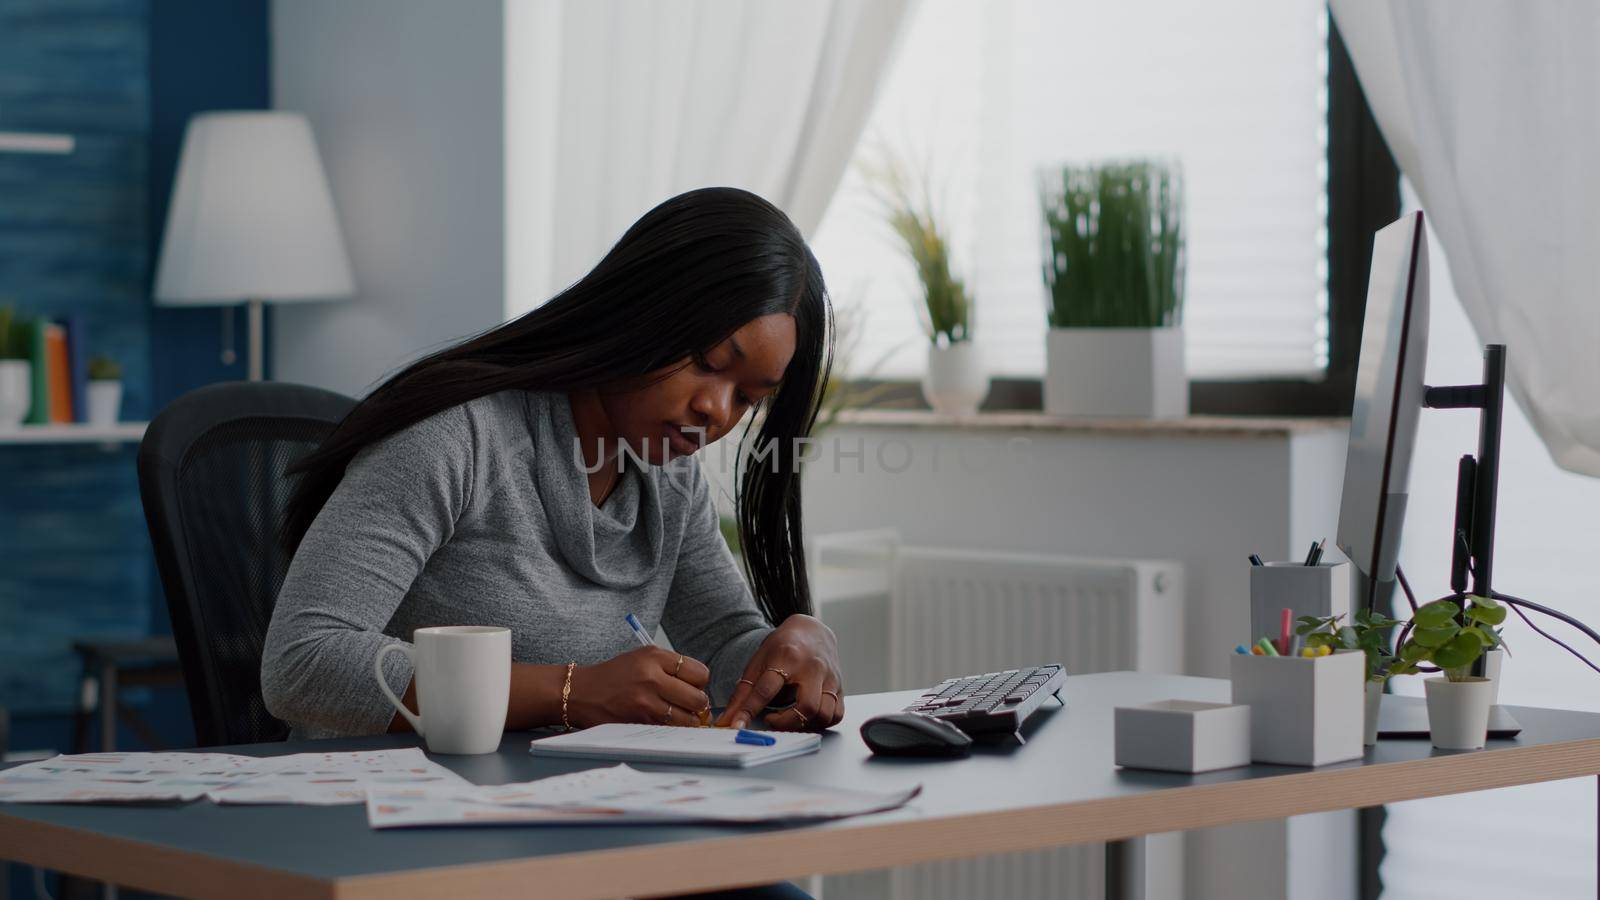 Black student writing education ideas on stickey notes sitting at desk table in living room. Young woman studying business at univeristy using elearning platoform working remote from home